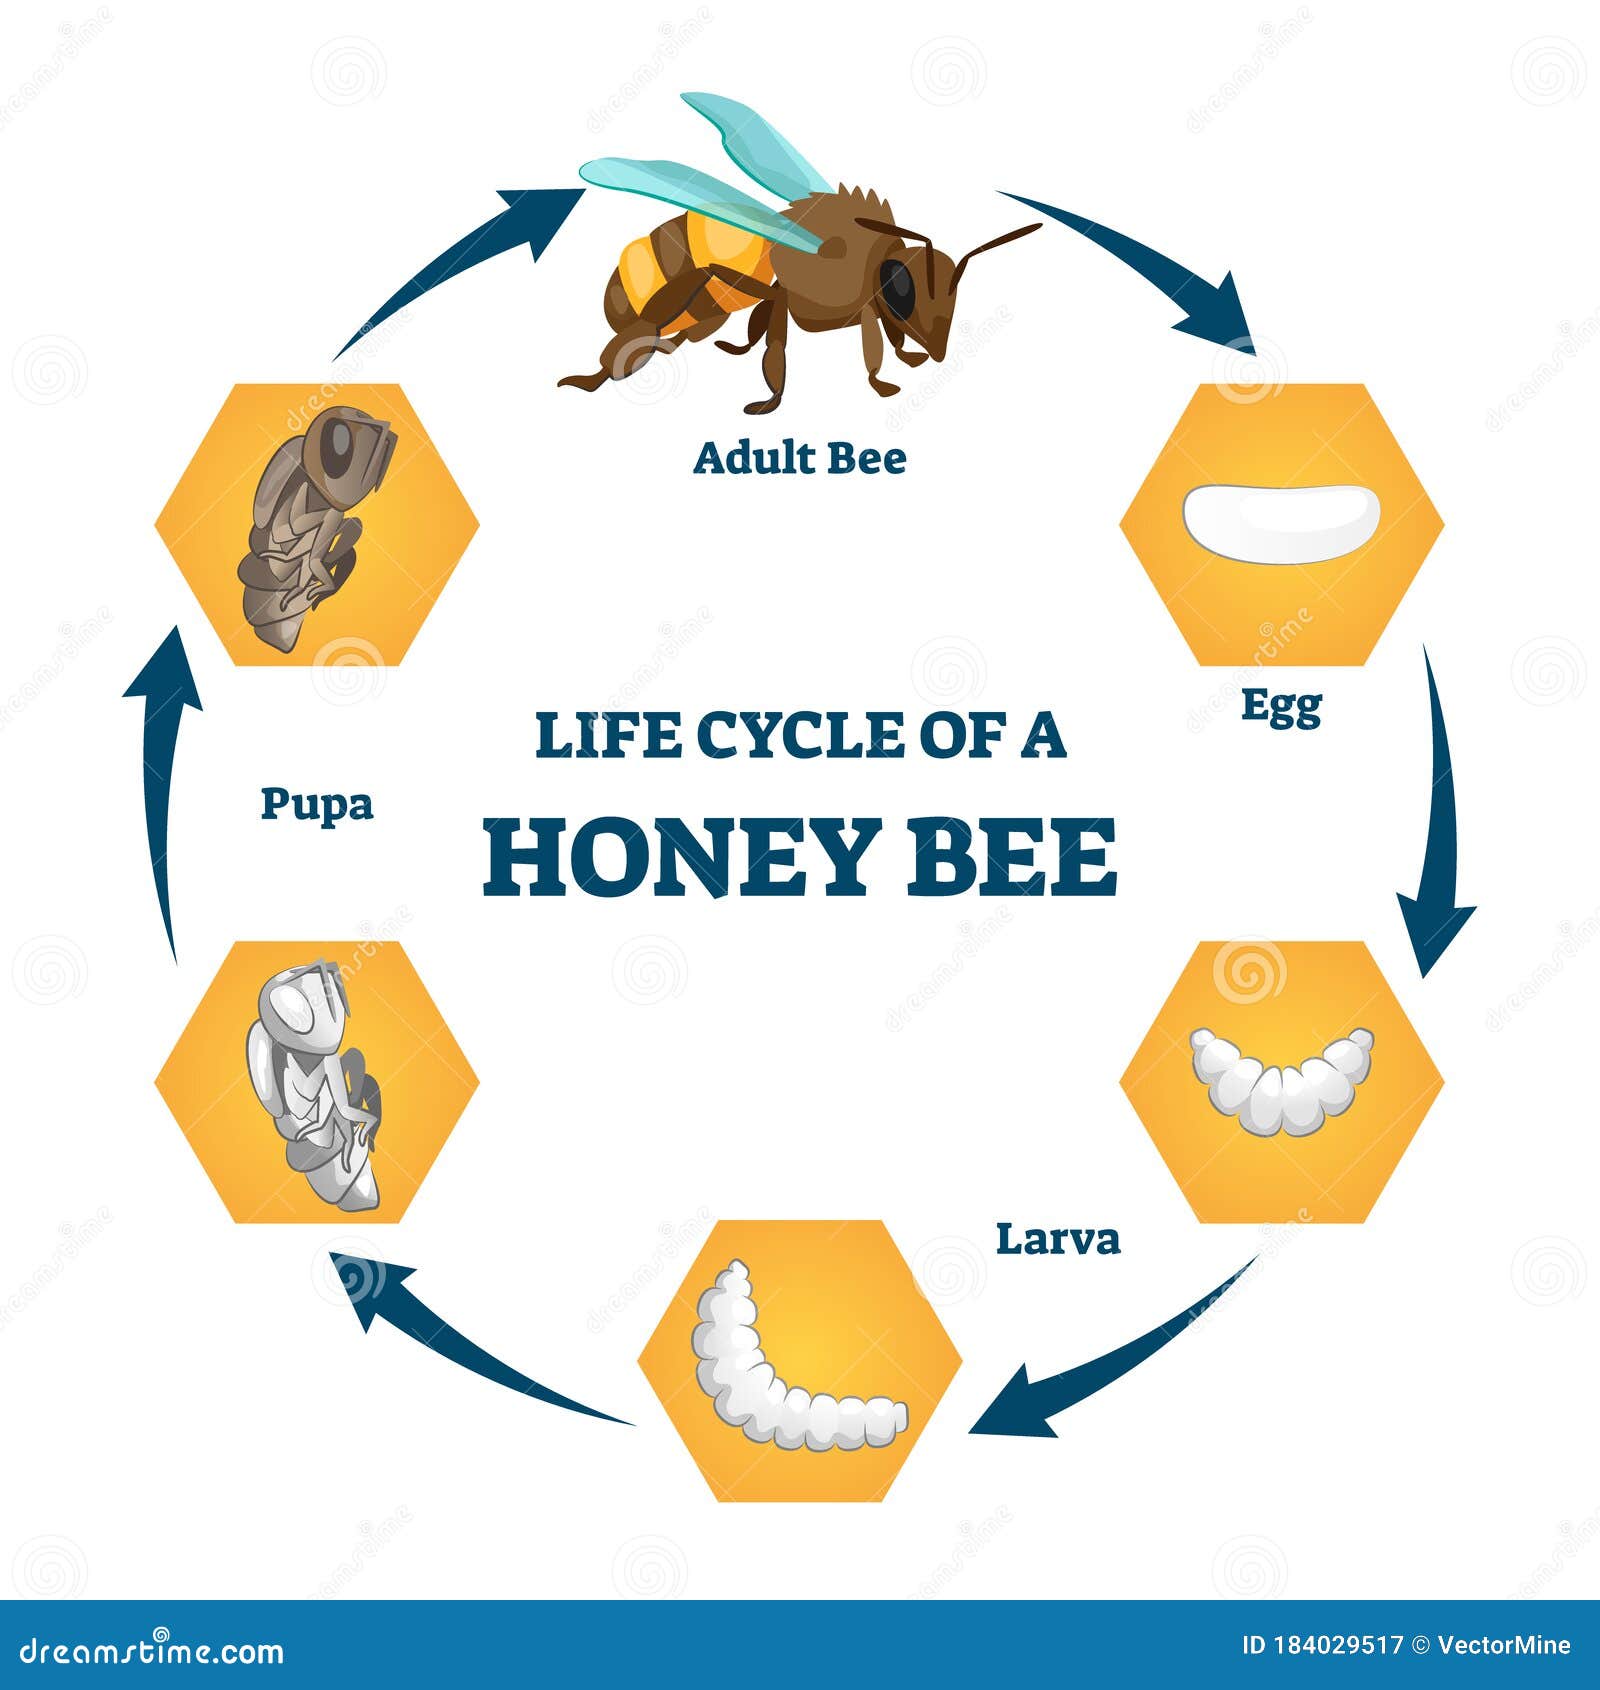 Albums 102+ Images simple life cycle of honey bee diagram Stunning